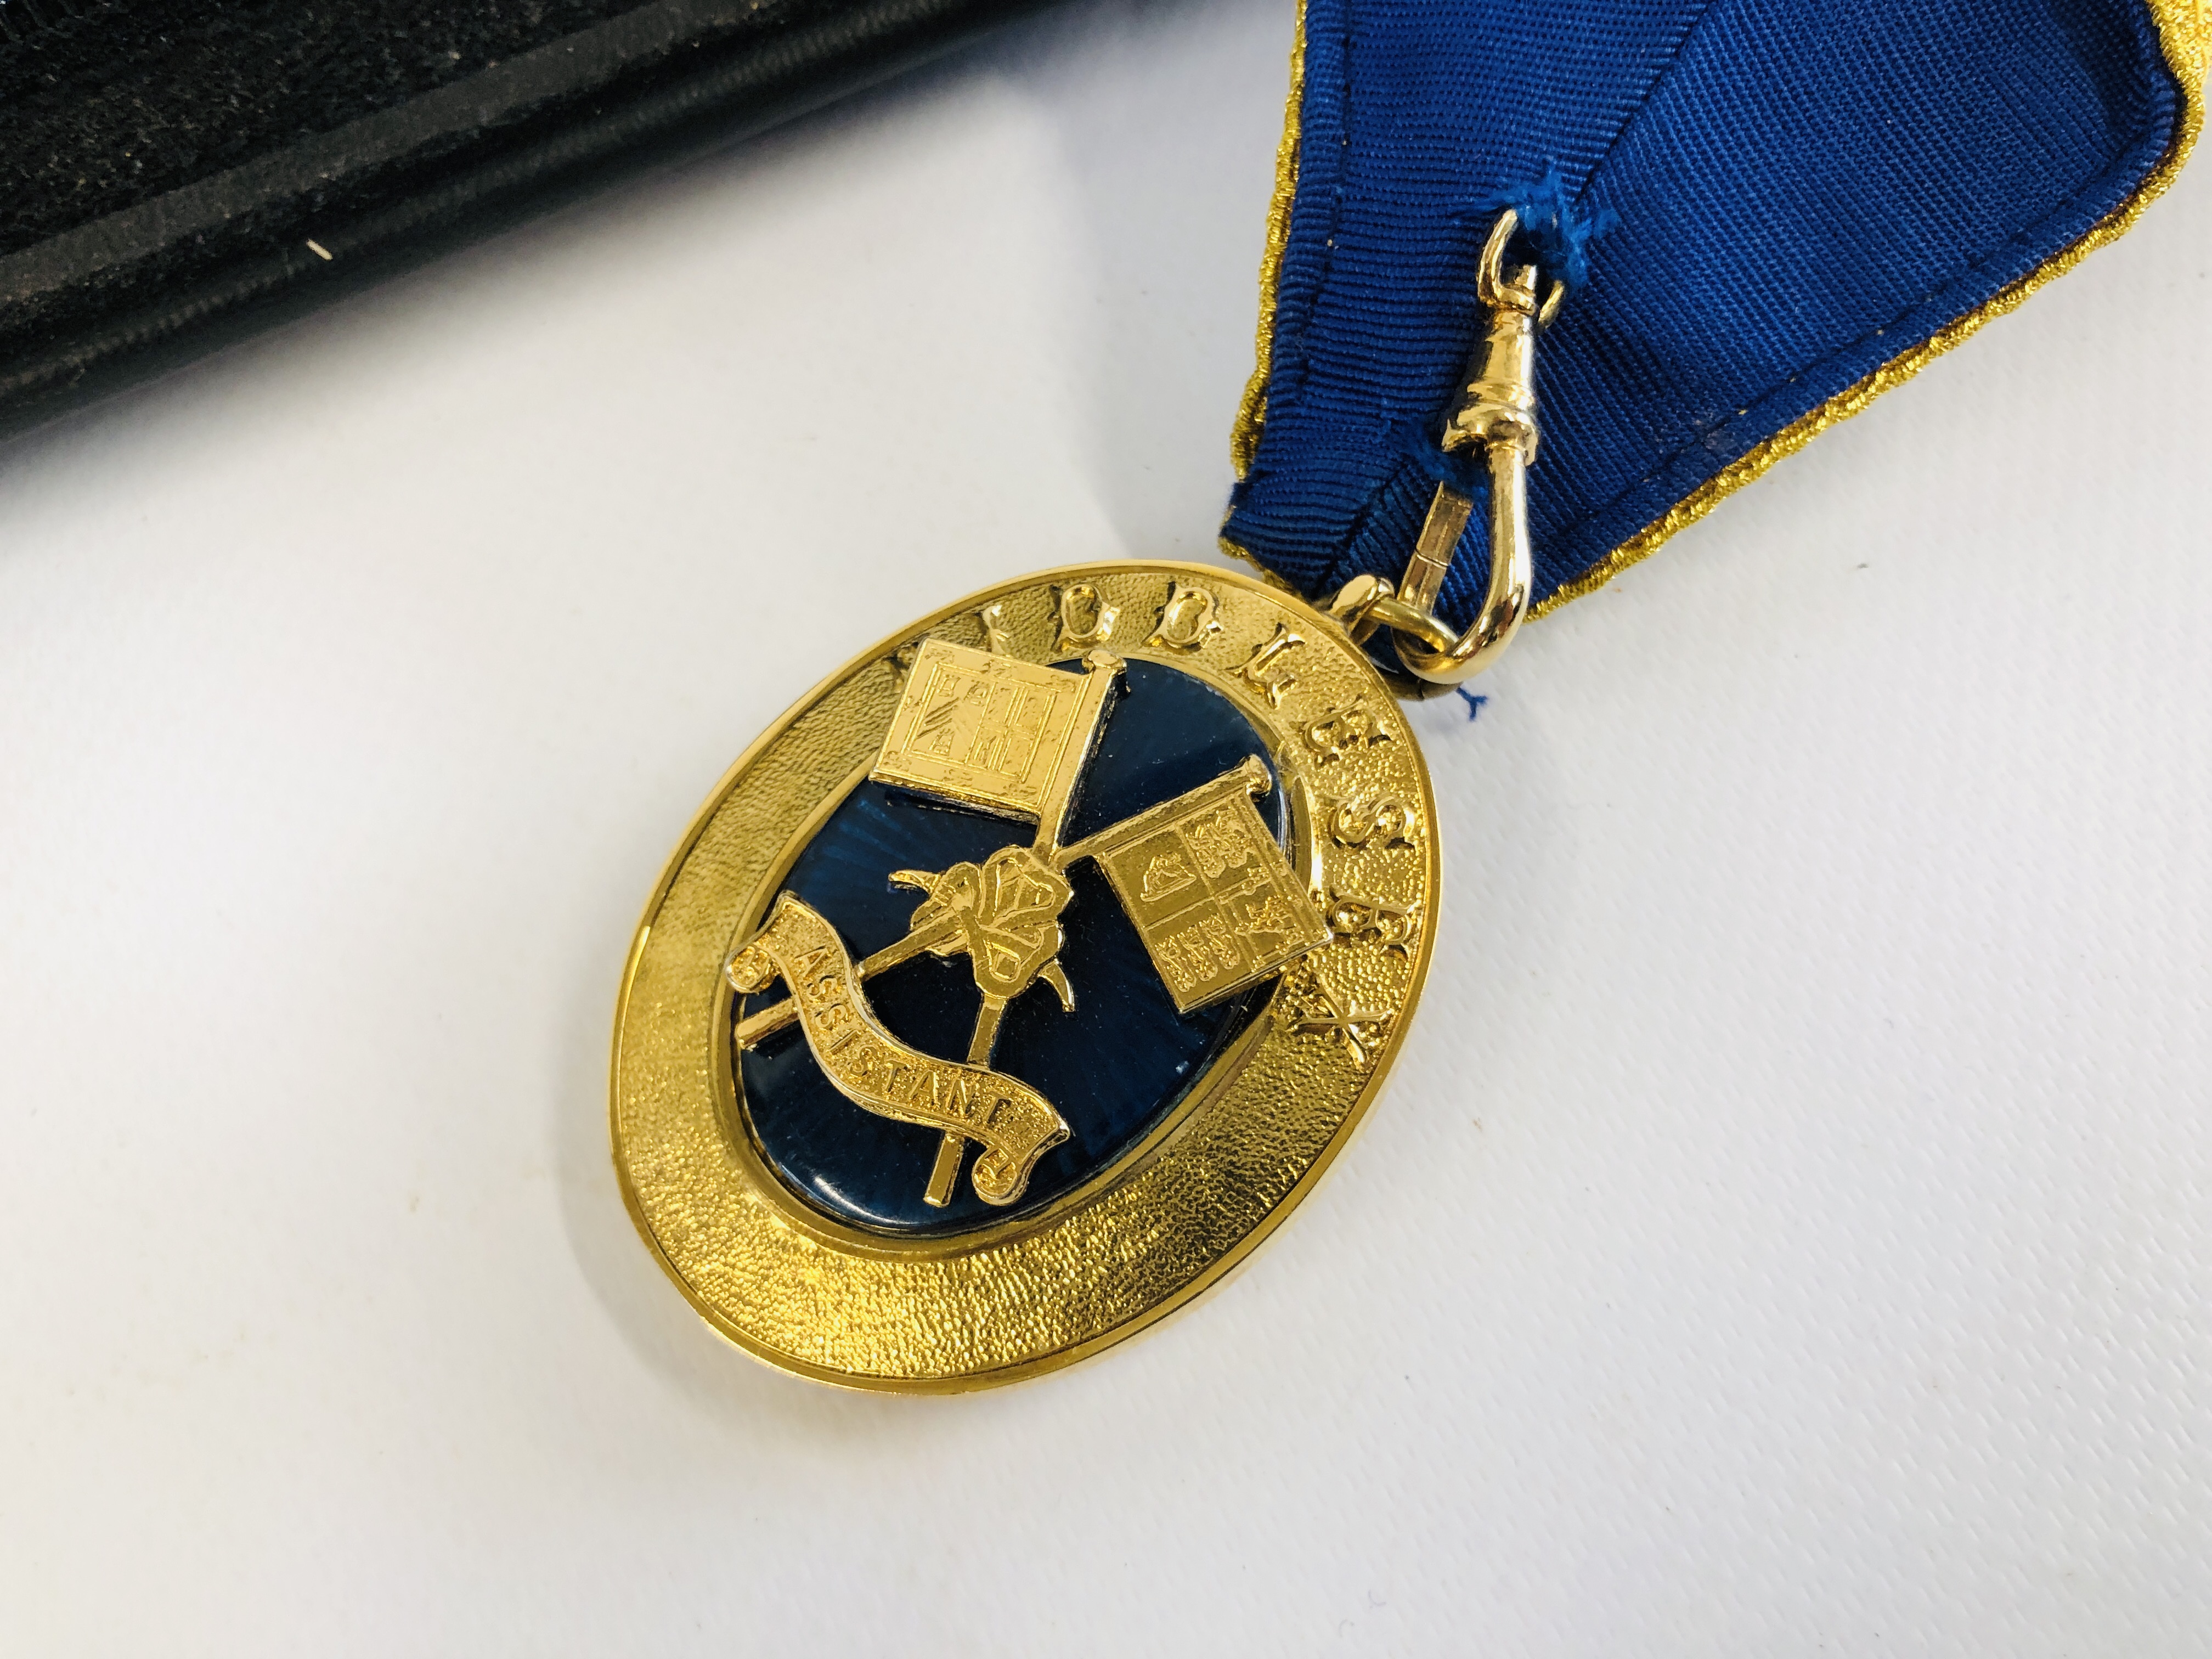 A GROUP OF "MIDDLESEX" MASONIC REGALIA IN CARRY CASE. - Image 2 of 4